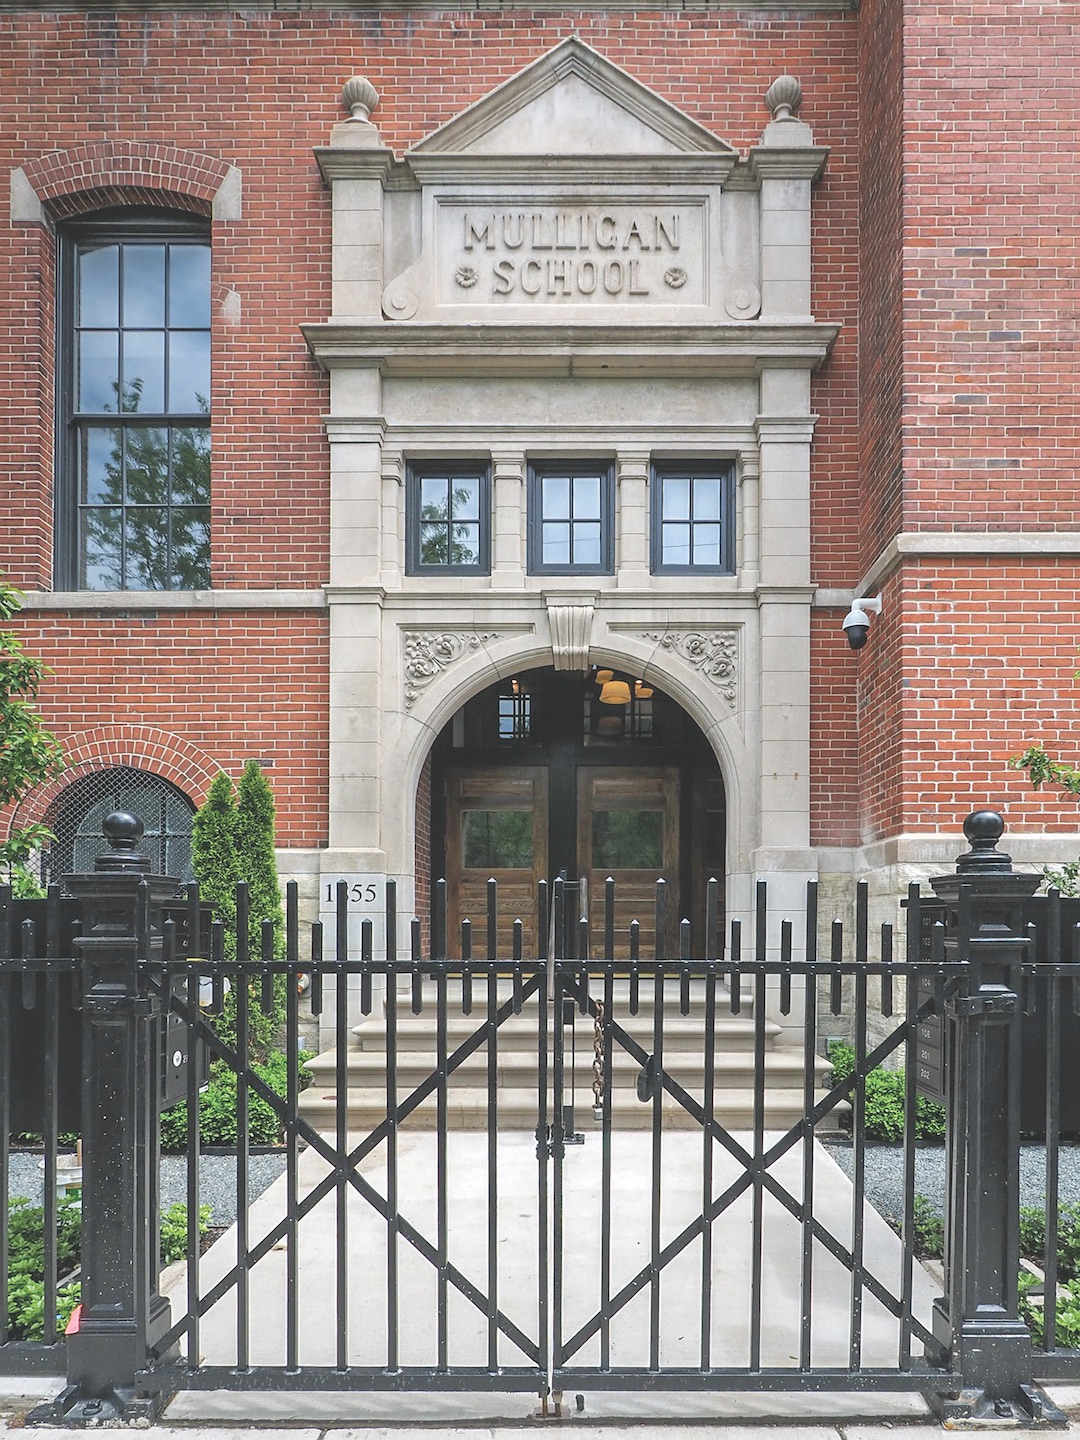 The main entry to Mulligan School